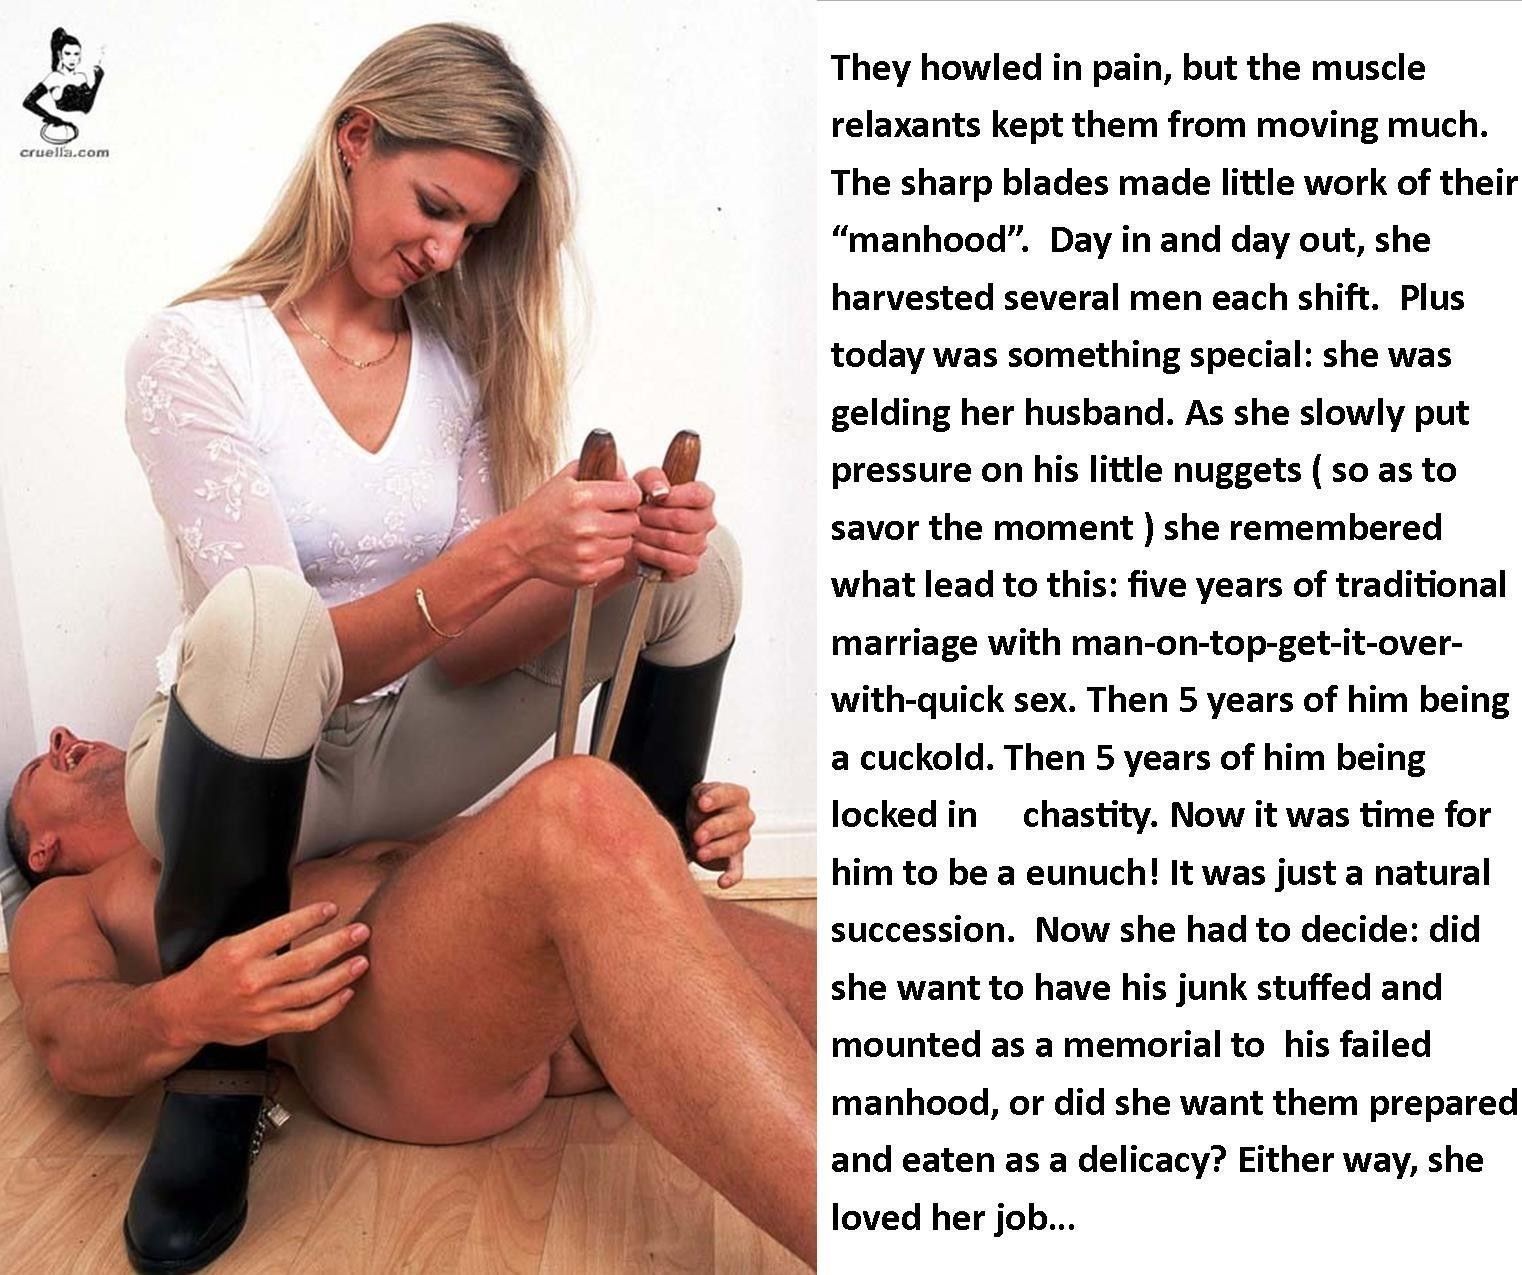 Femdom cuckold chemical castration emasculation stories 